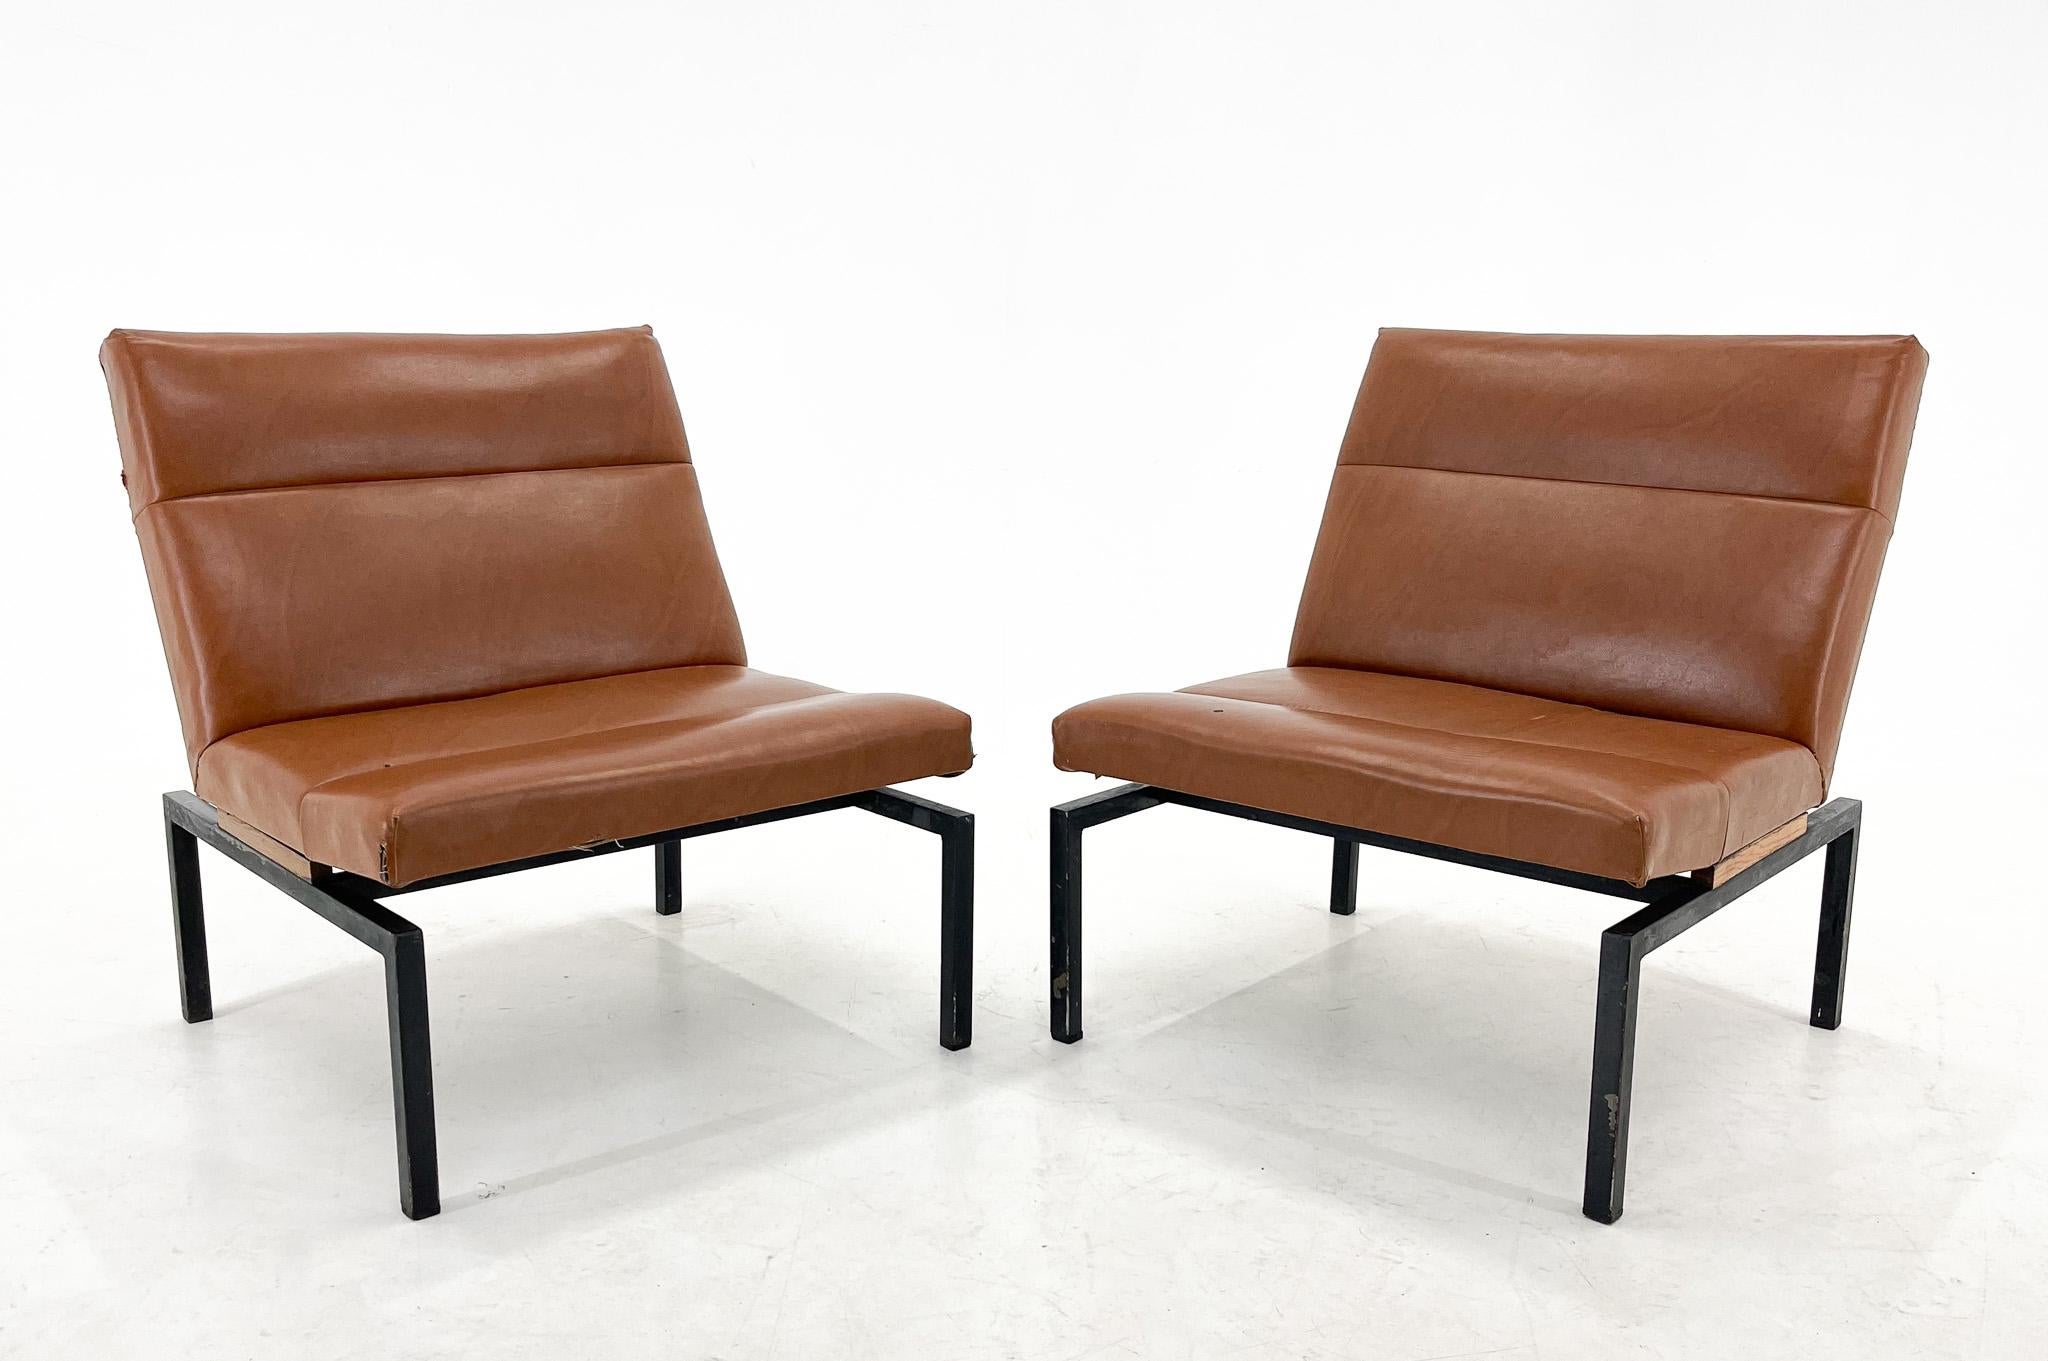 Vintage design lounge chairs in industrial style. Made of faux leather with metal legs and wooden detail. Suitable for new upholstery. Up to 4 pieces available.